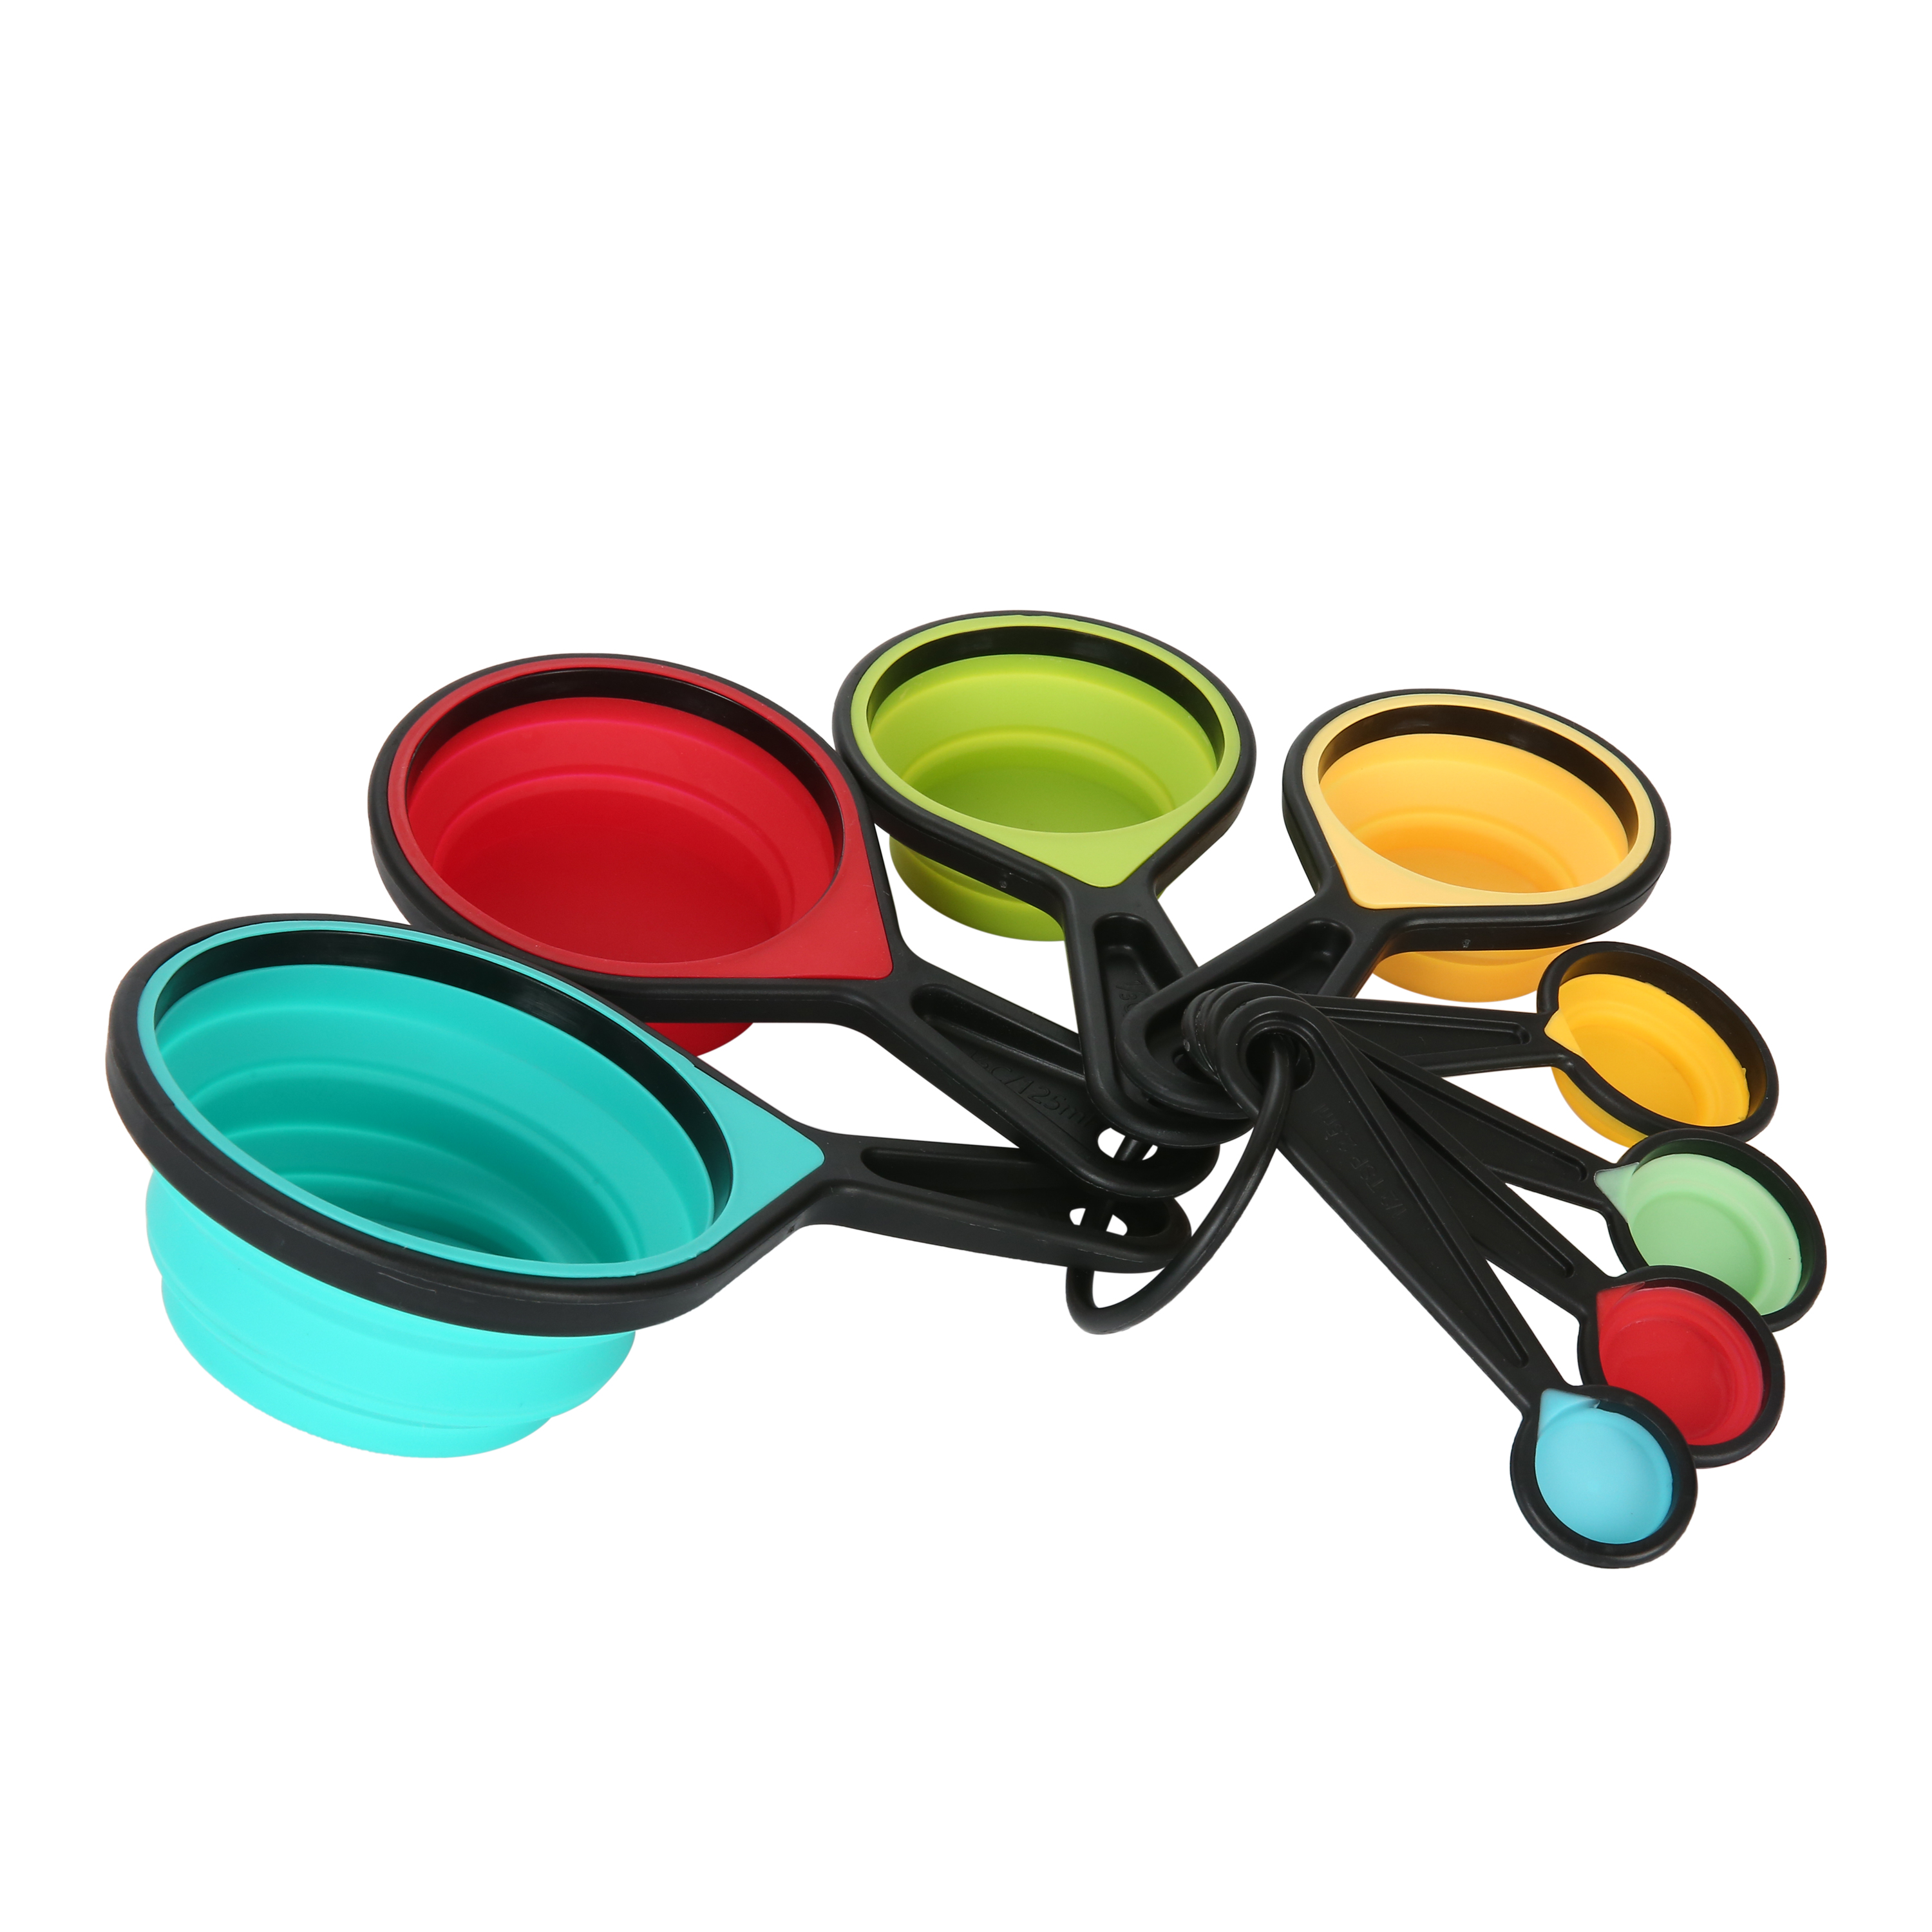 Mainstays 8-Piece Collapsible Silicone Measuring Cup Set - Walmart.com